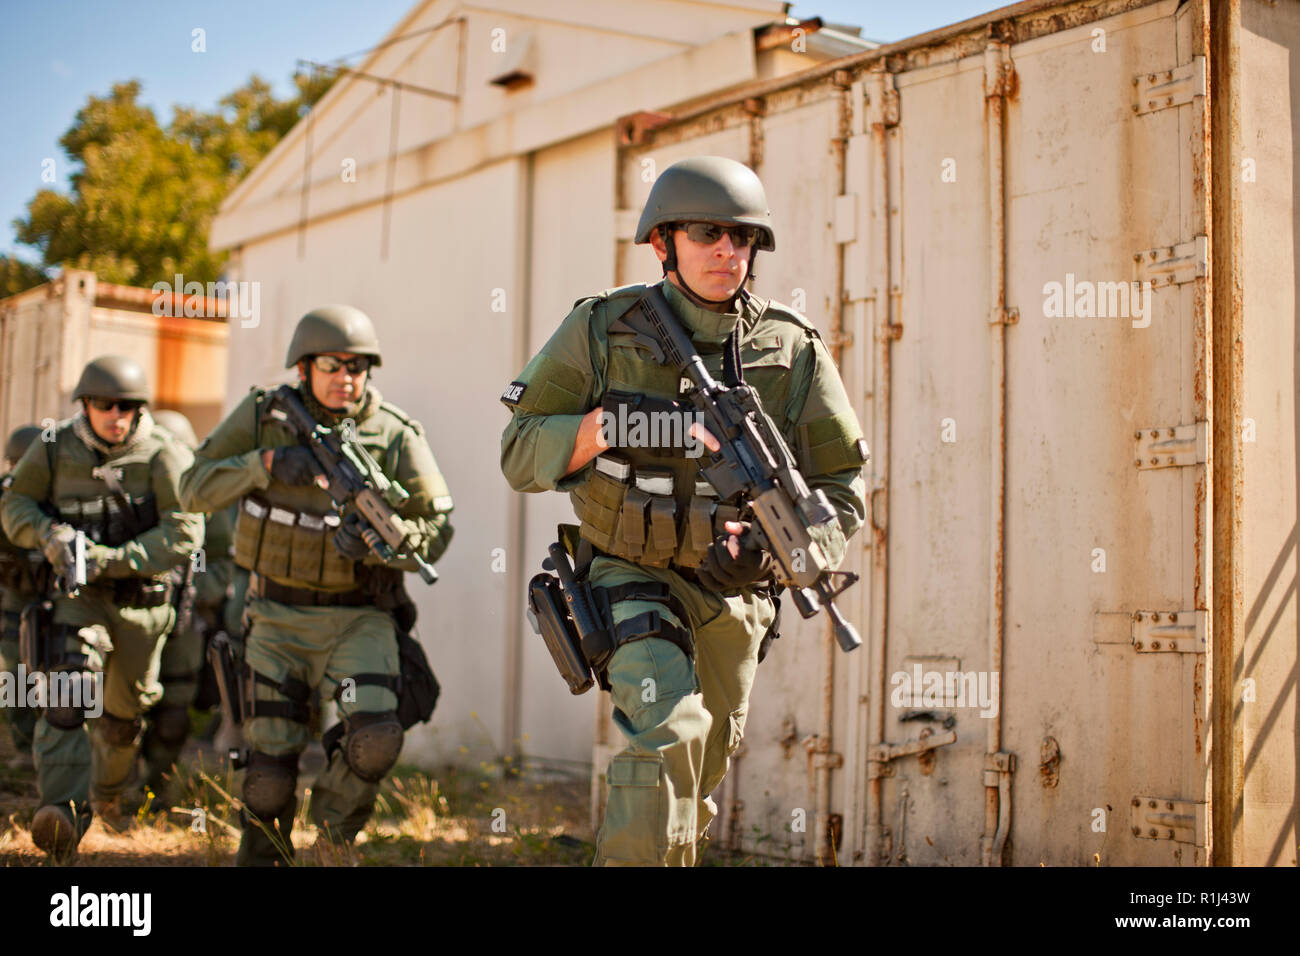 Team of armed military police holding guns while running through a battle zone. Stock Photo